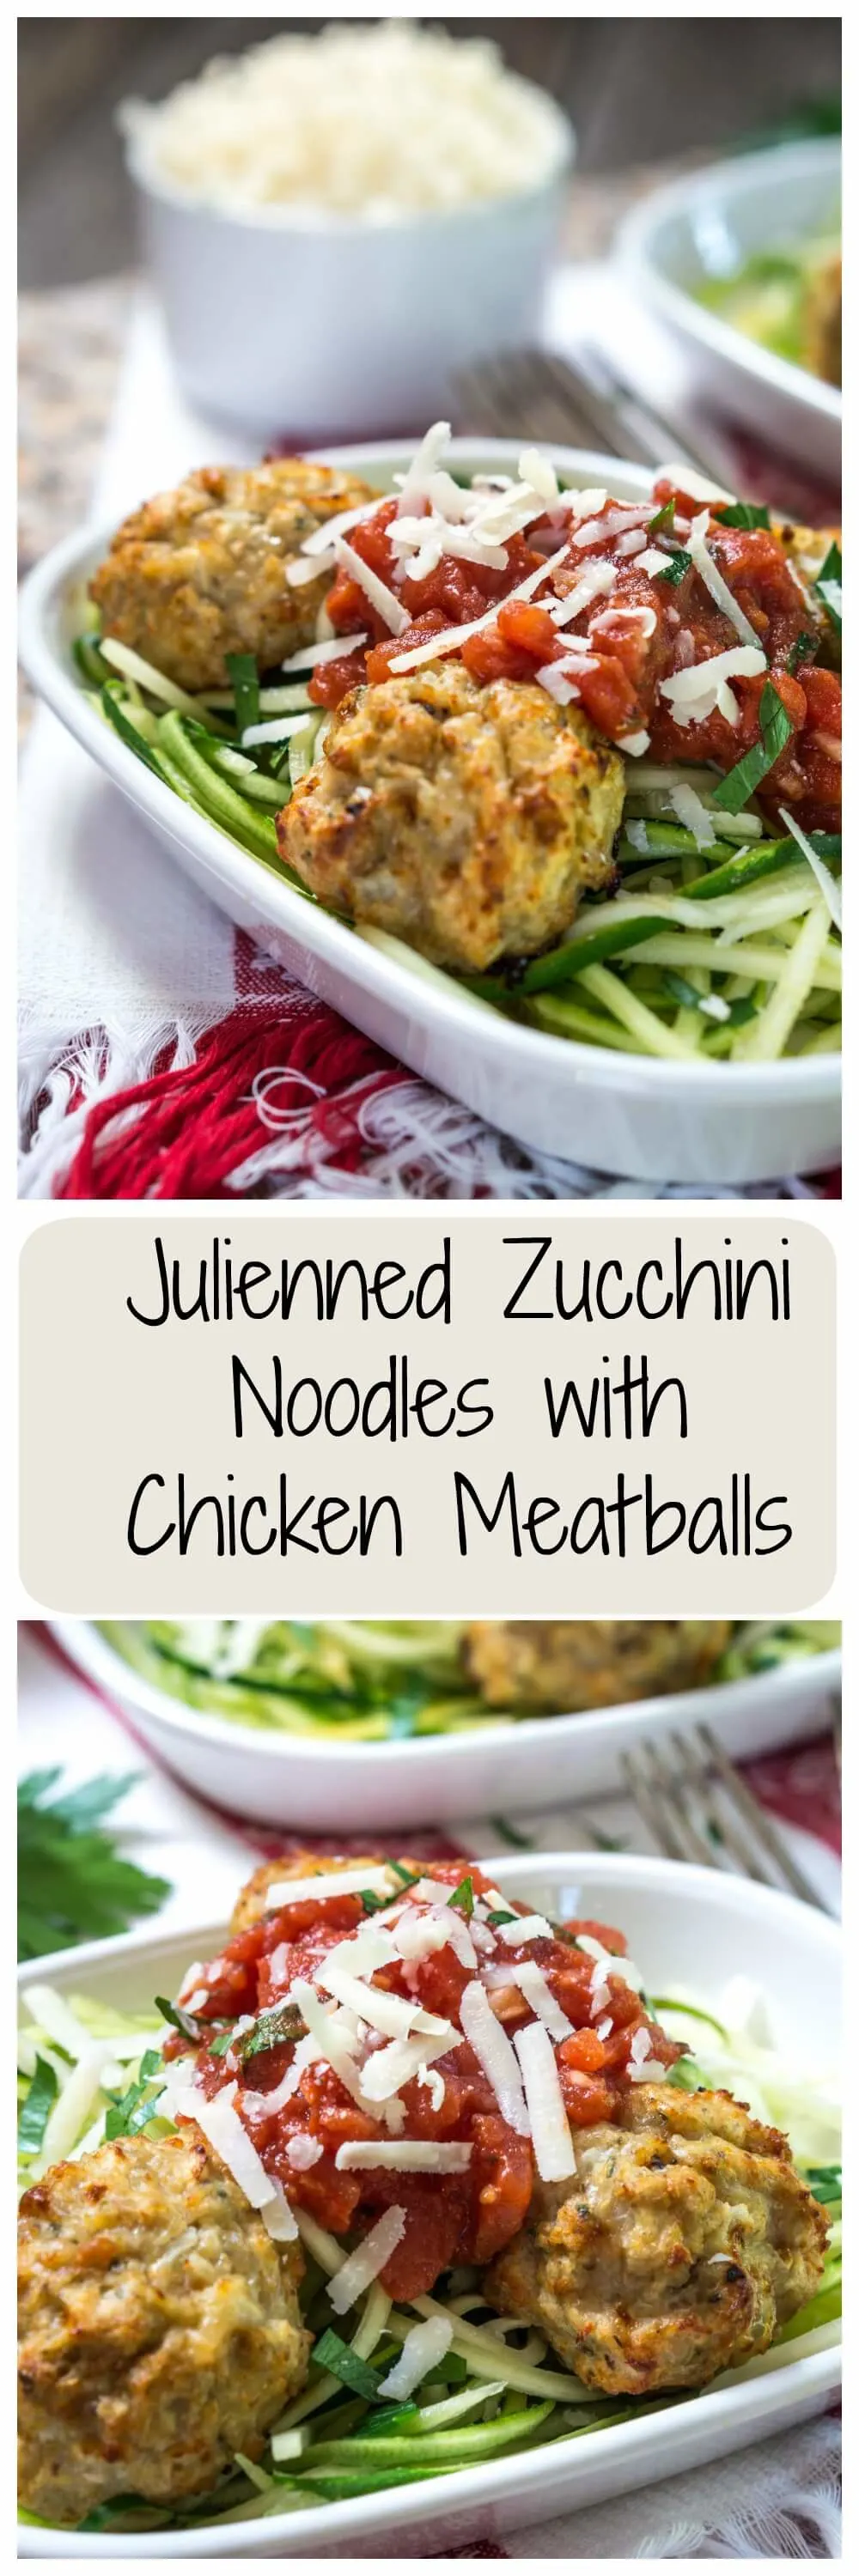 Two photo collage of two views of a white dish of julienned zucchini topped with chicken meatballs, marinara and a sprinkle of parmesan cheese. The banner \"Julienned Zucchini Noodles in Chicken Meatballs\" runs through the center.